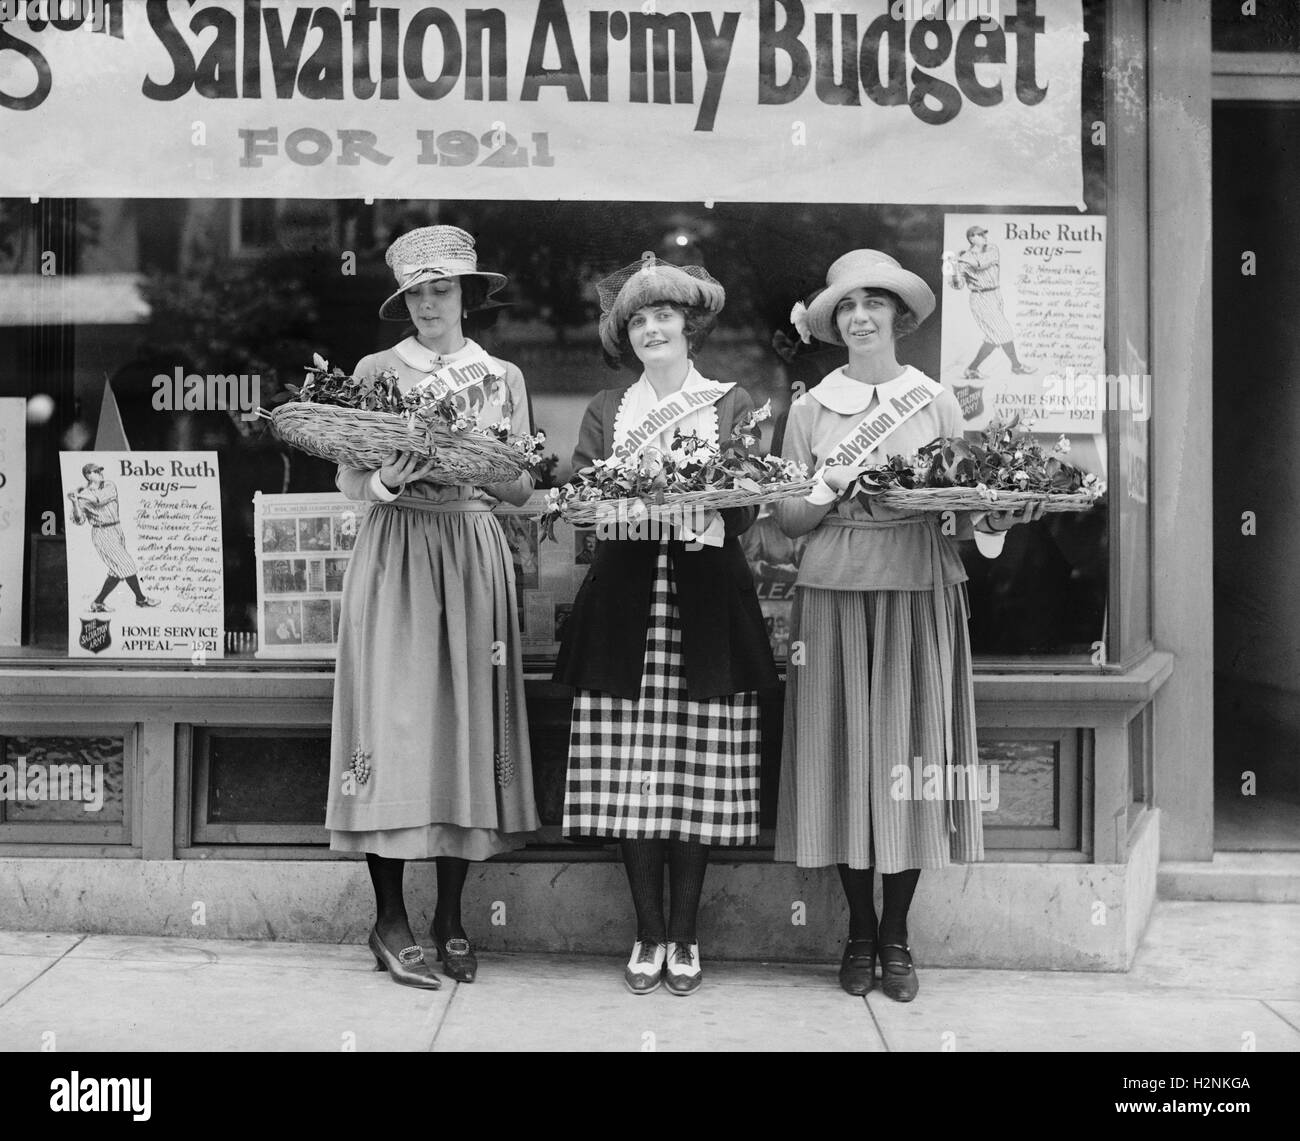 Young Women Volunteers, known as Salvation Army House Girls, Portrait, Washington DC, USA, National Photo Company, 1921 Stock Photo